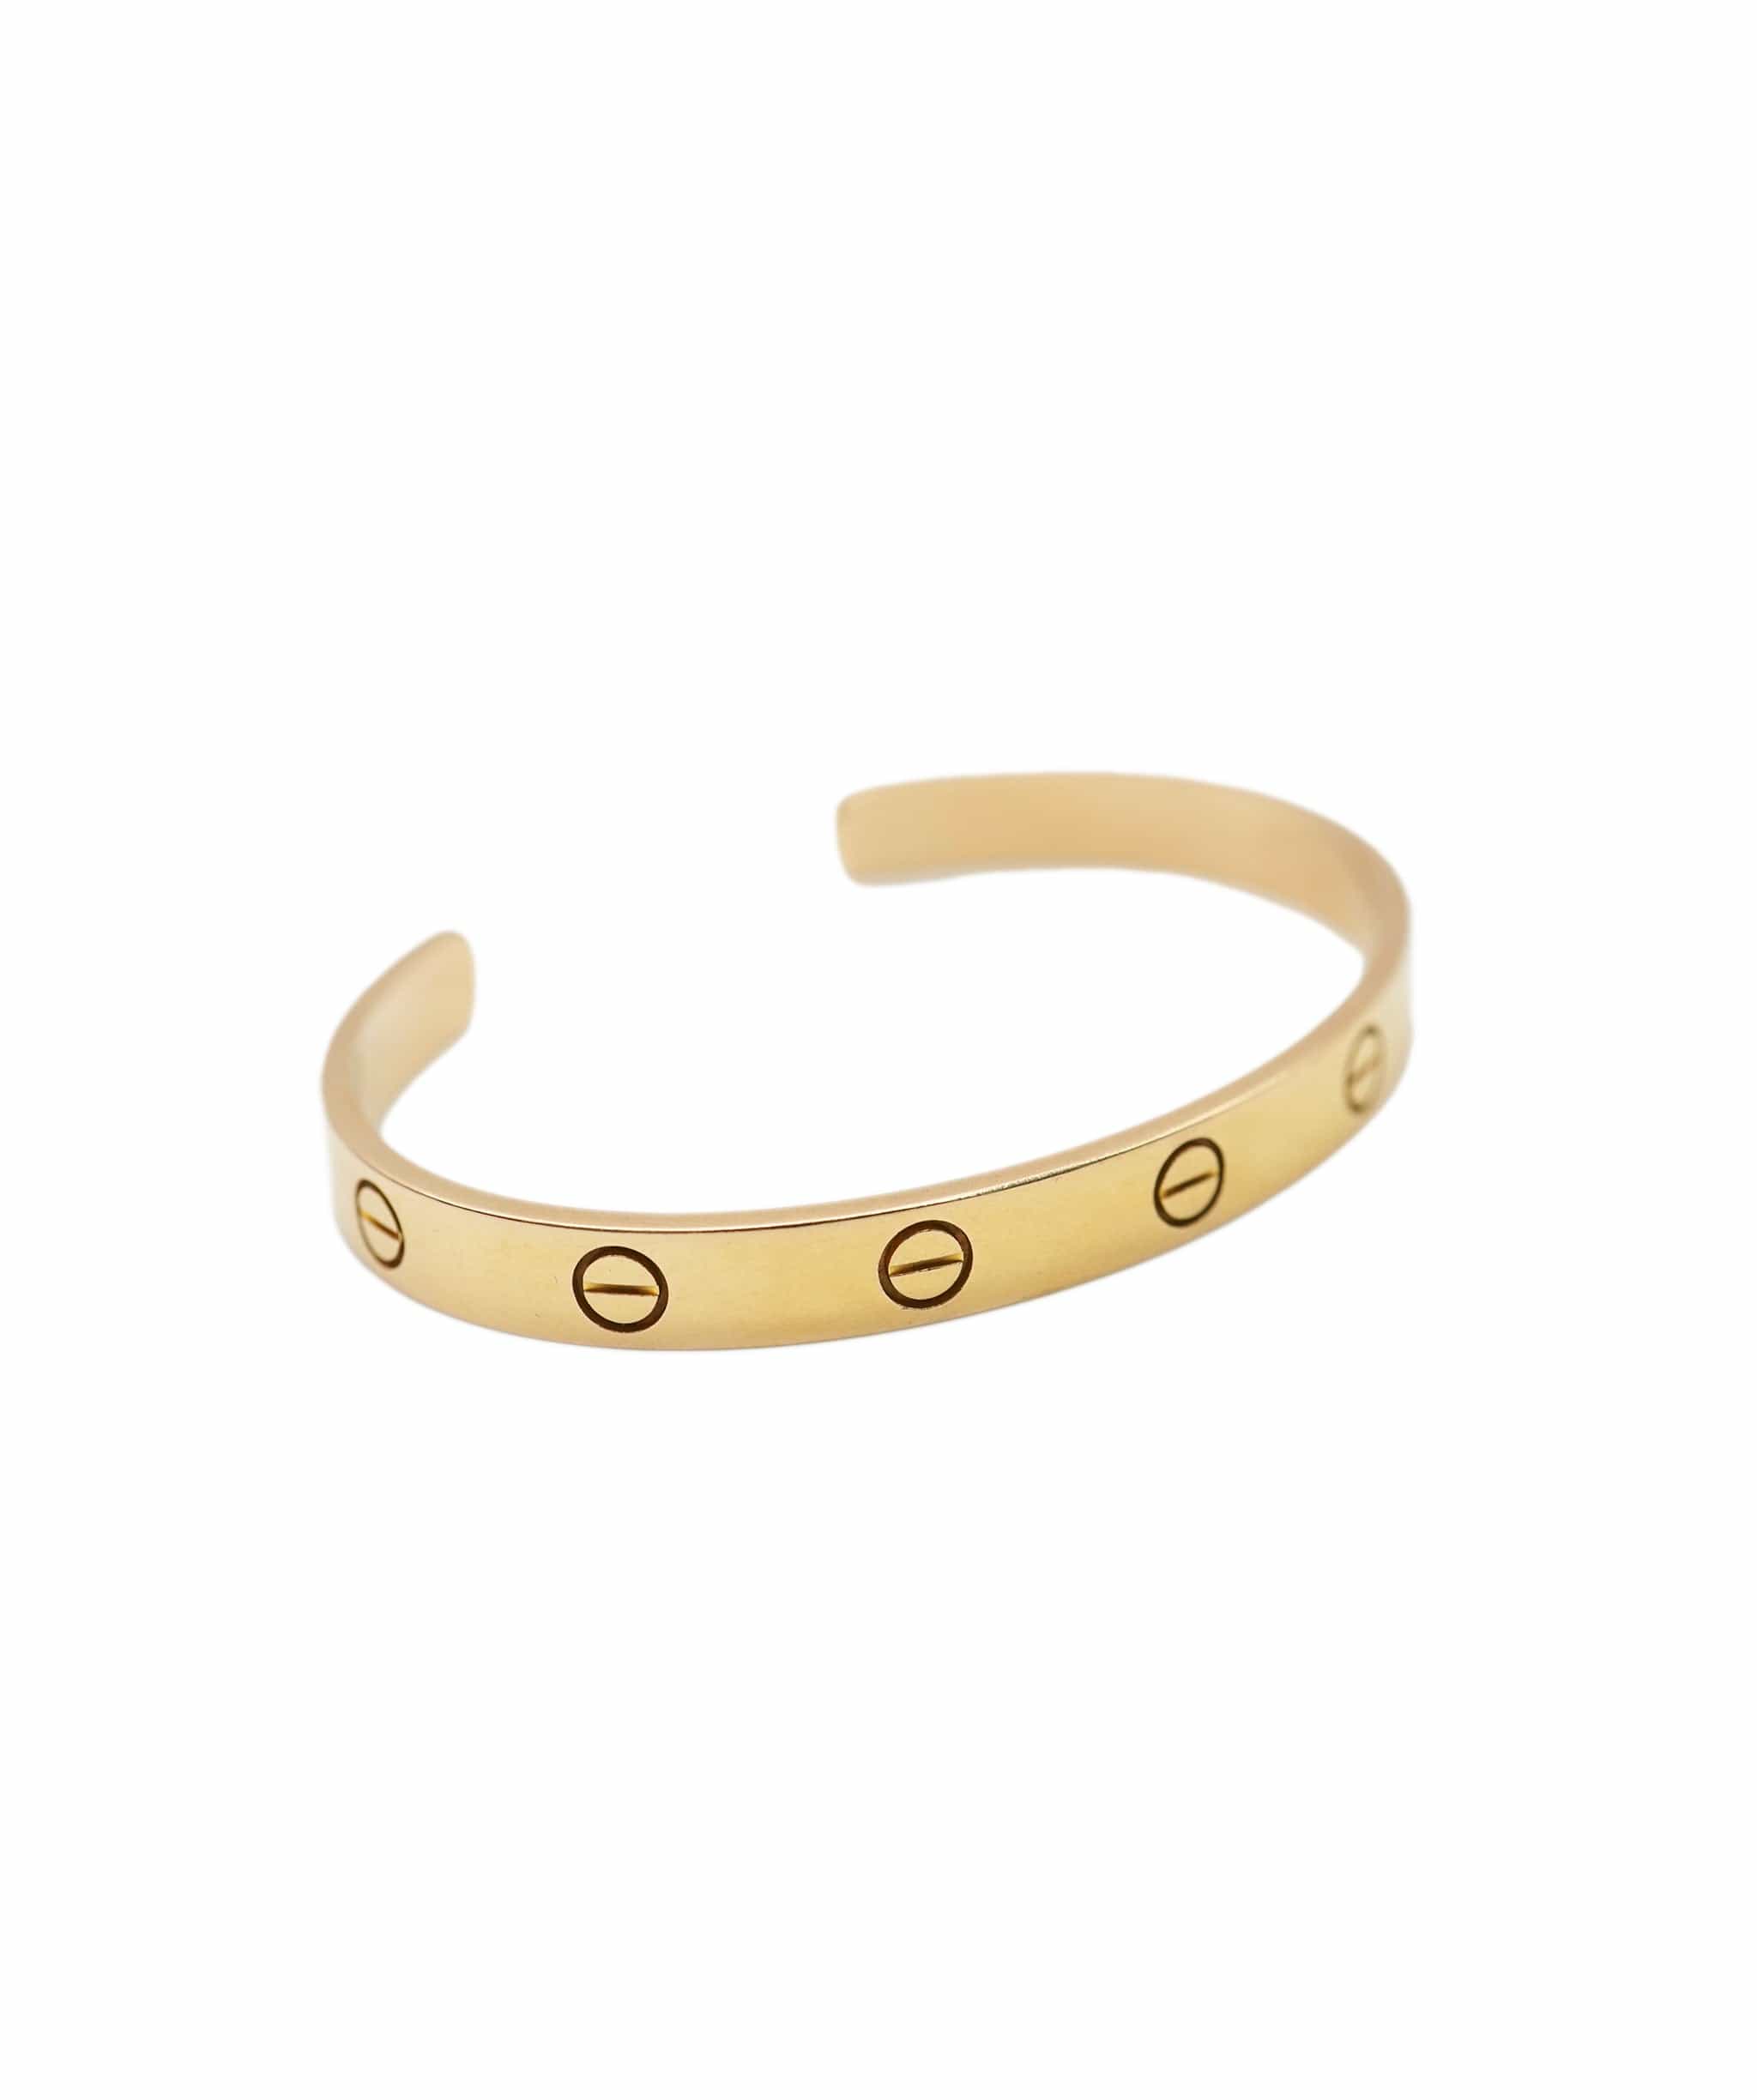 Cartier Cartier Love Bracelet cuff yellow gold size 17 with Box ASL10674